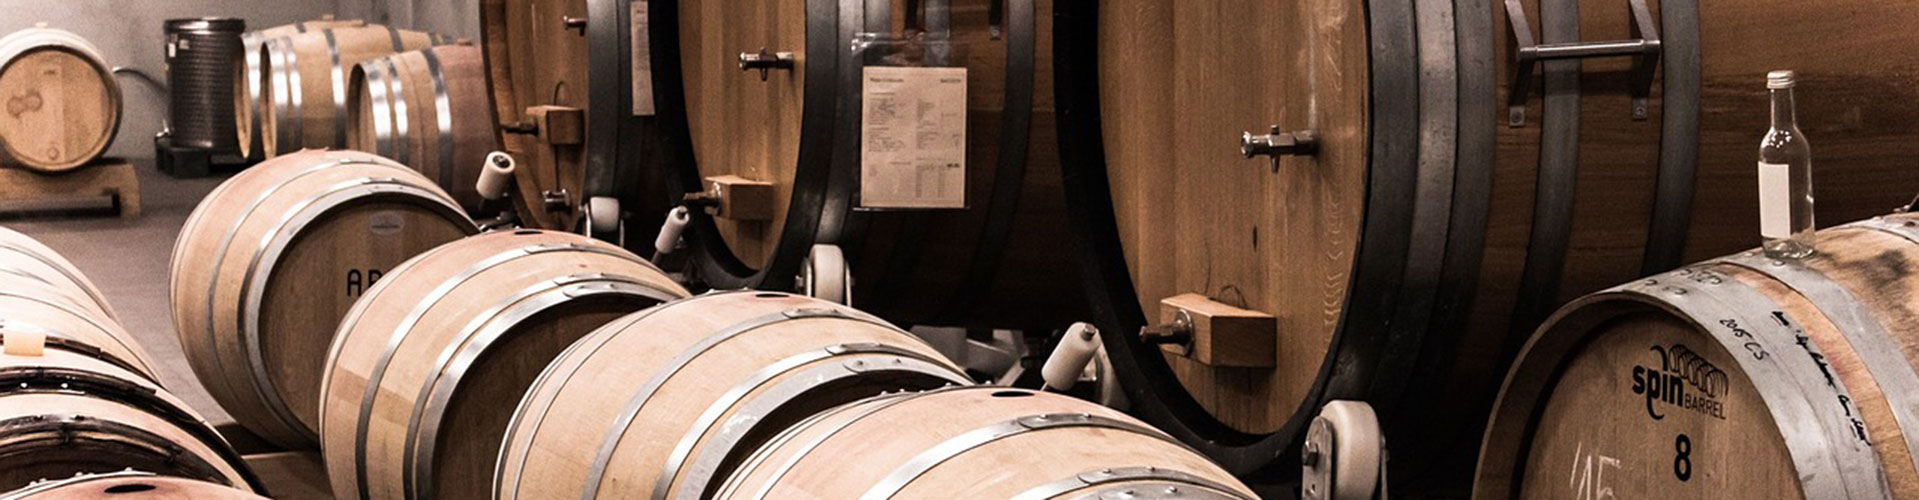 A winery cellar room with small and large oak wine barrels and winemaking equipment.